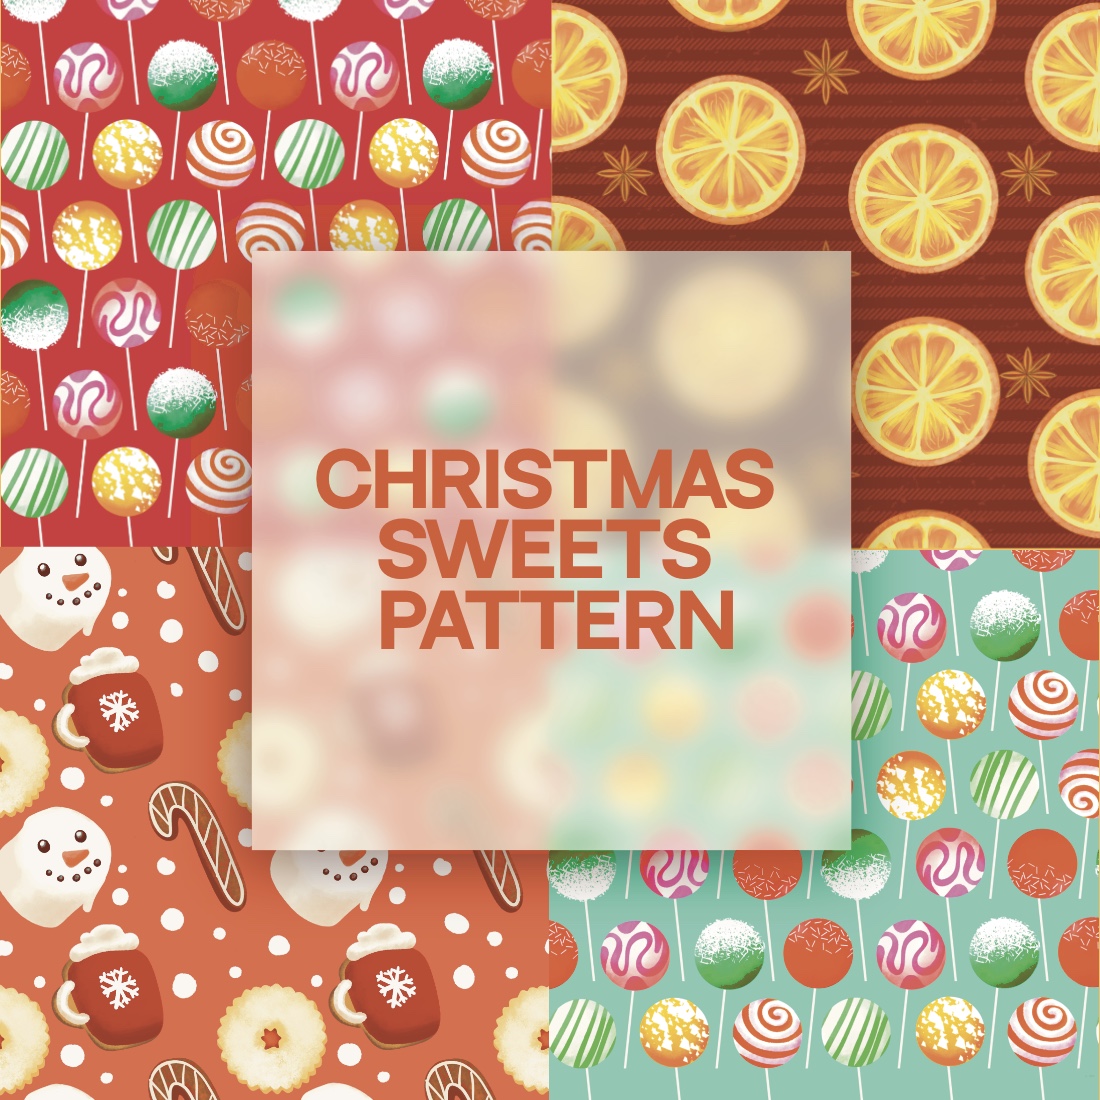 Sweets Christmas Colorful Pattern Design cover image.